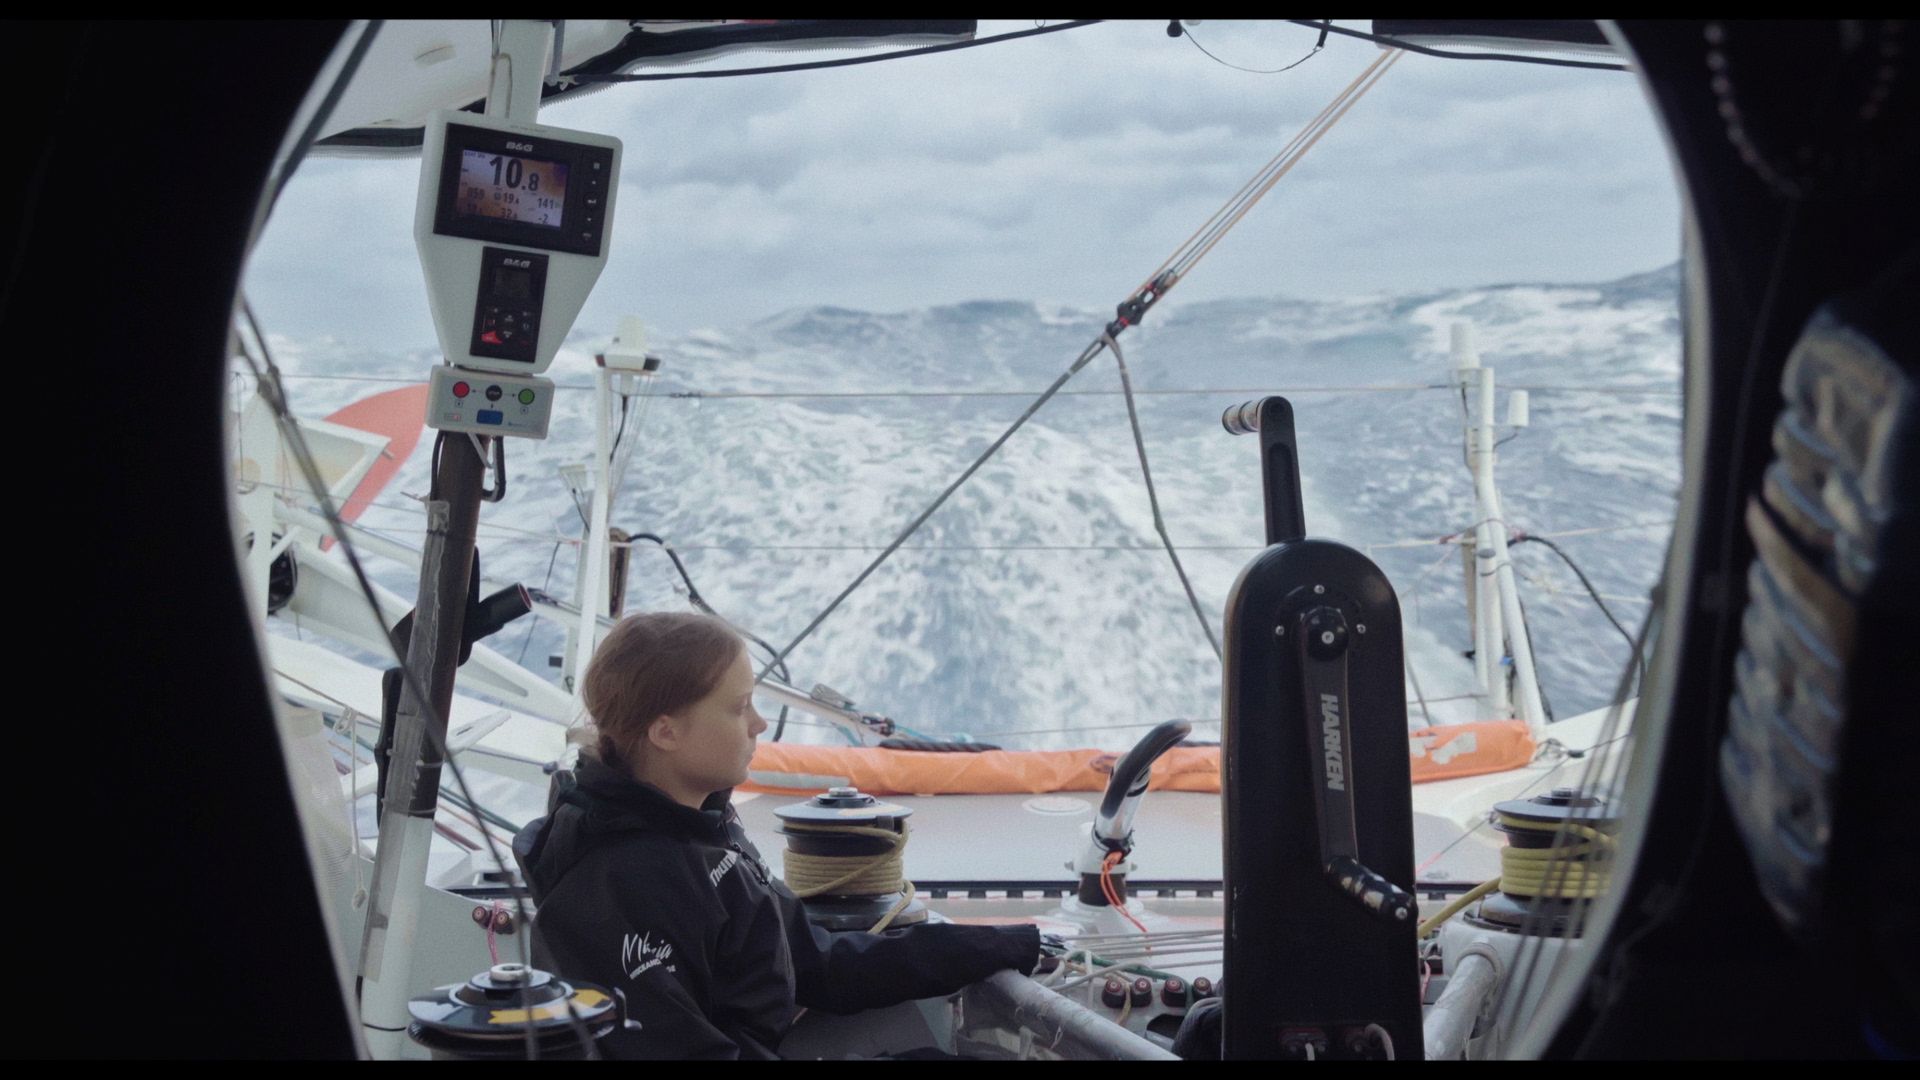 Greta Thunberg sits on a boat in the foreground with the ocean in the background